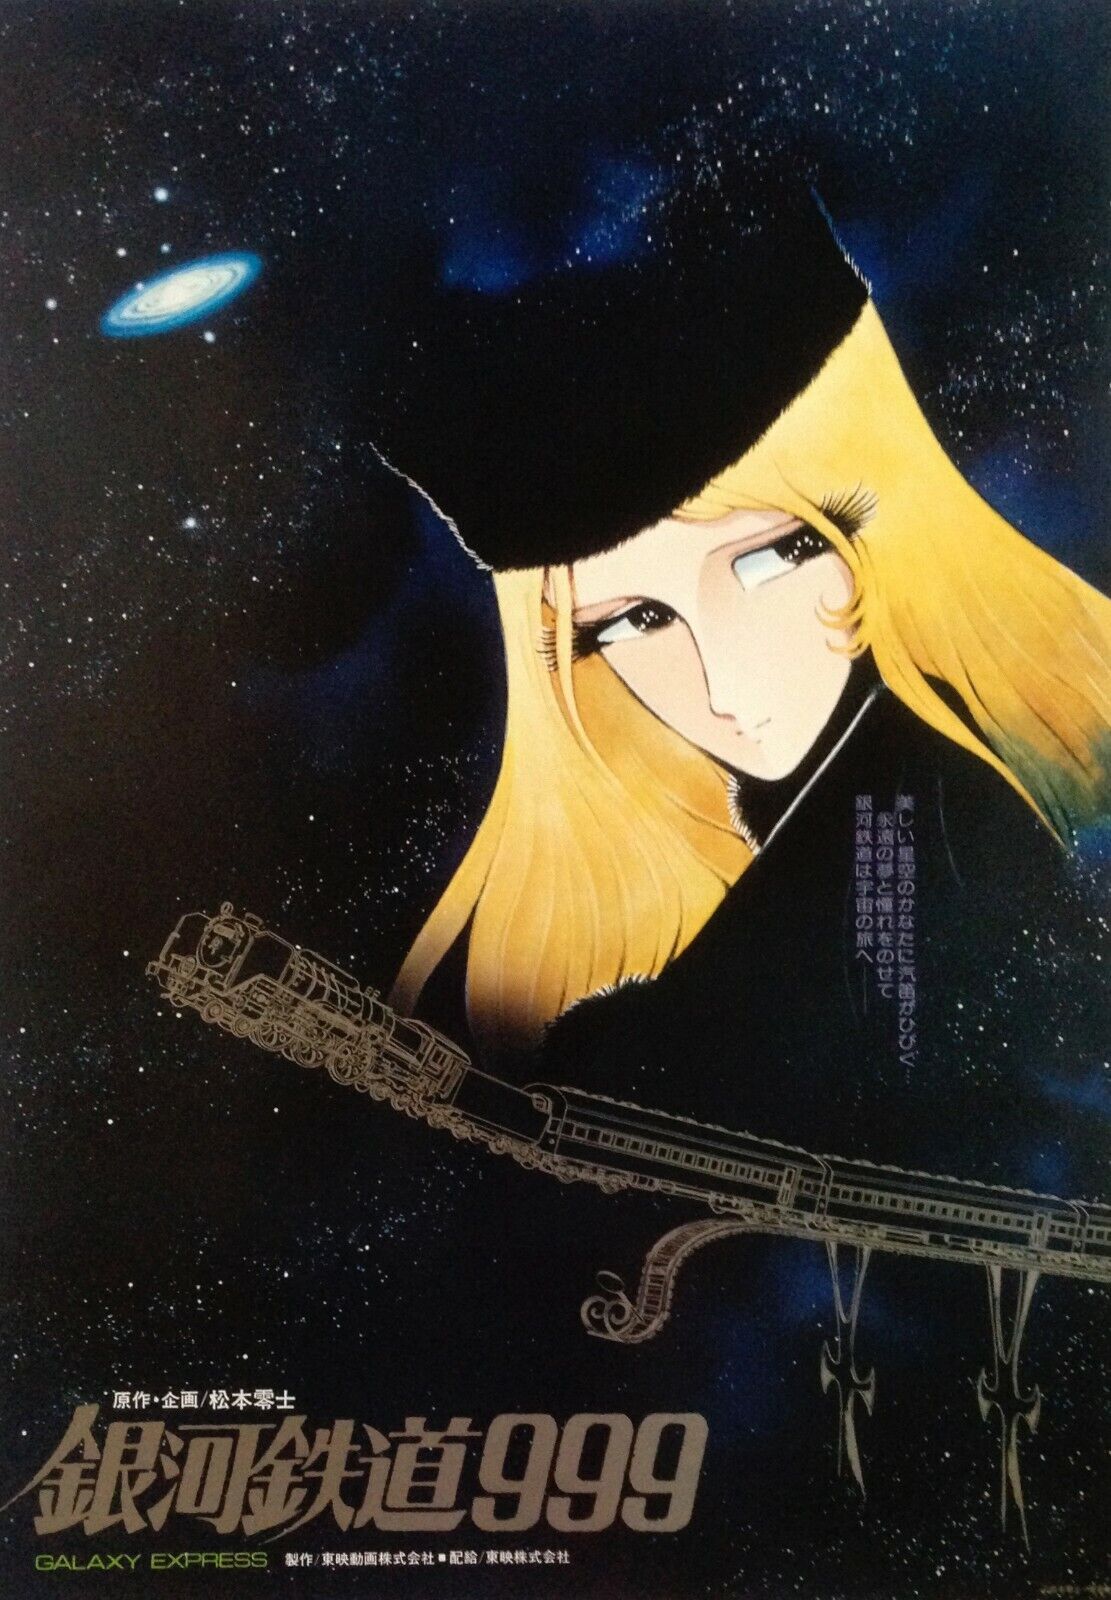 Galaxy express 999  :  poster New  (made in Japan)